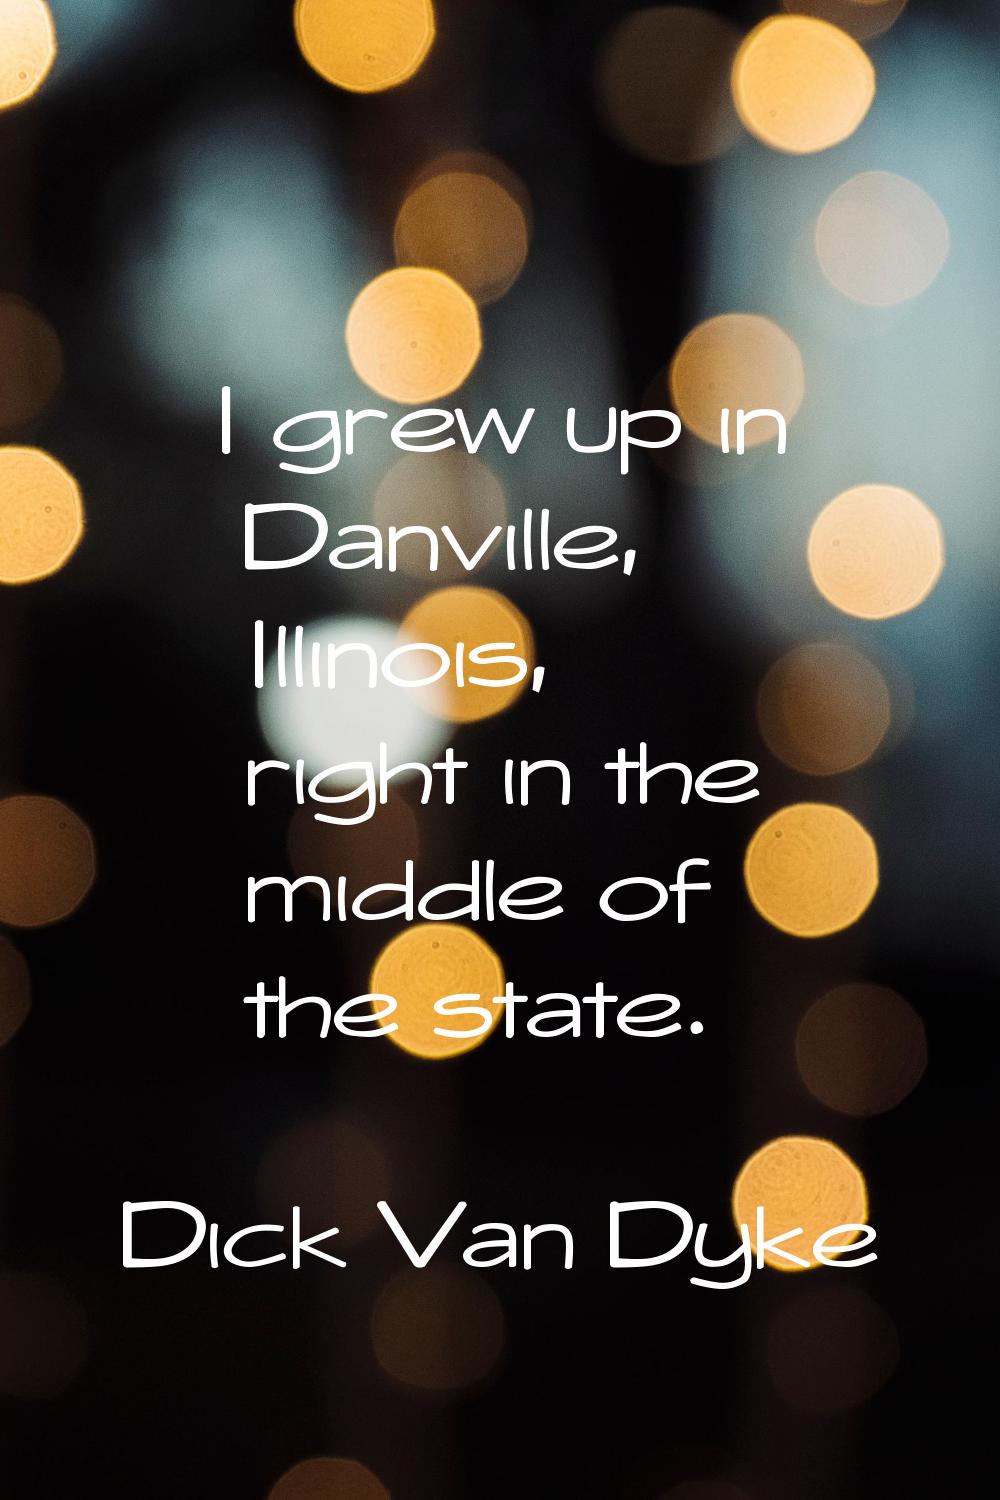 I grew up in Danville, Illinois, right in the middle of the state.